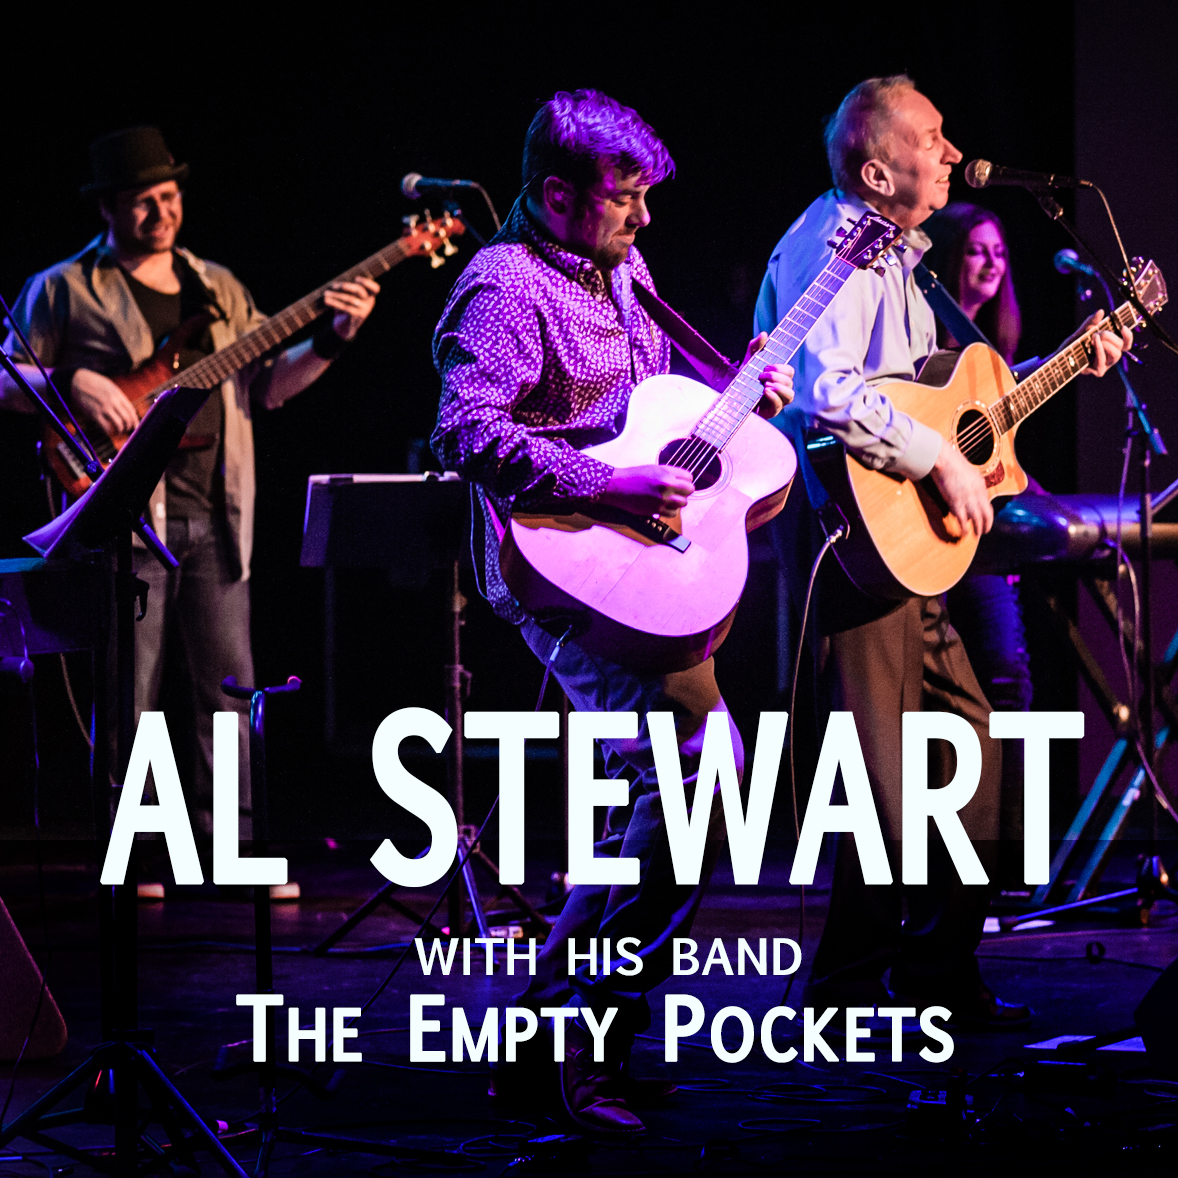 AL STEWART with THE EMPTY POCKETS RESCHEDULED to Friday, August 25